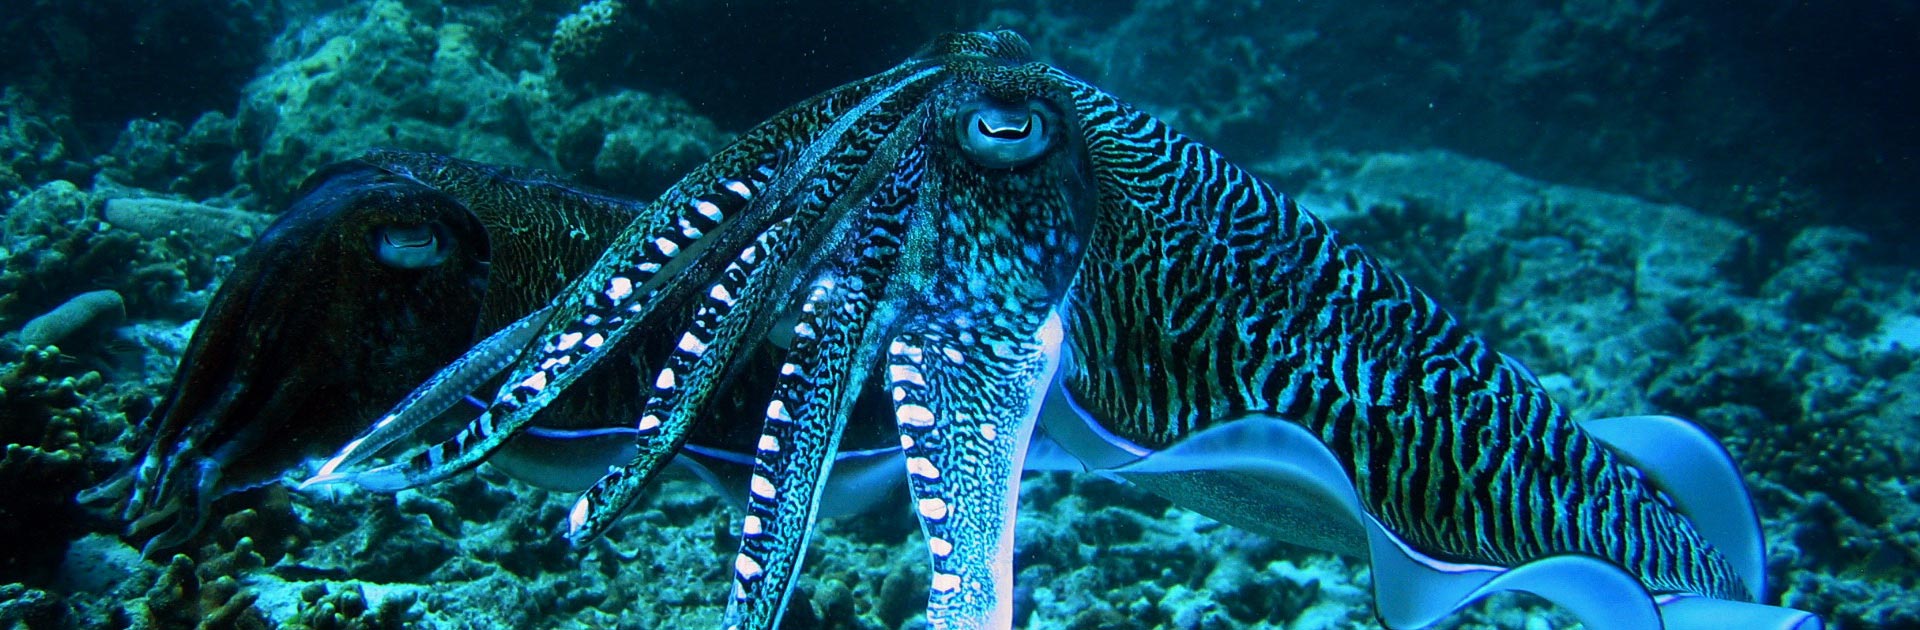 Night diving in Phuket brings out spectacular creatures like this electric Cuttlefish